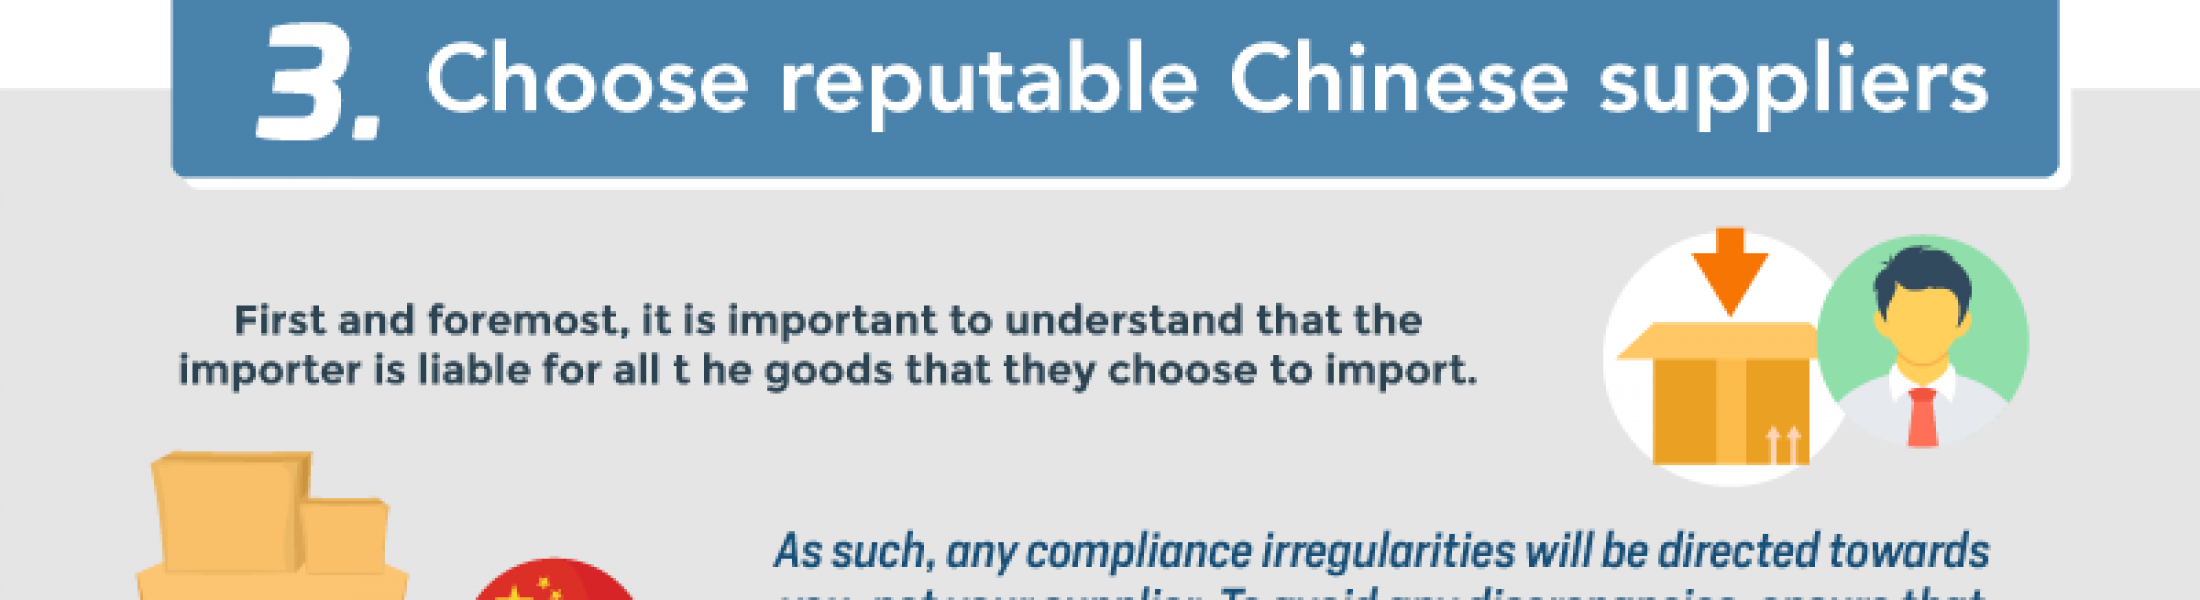 top-8-tips-on-importing-goods-from-china-infographic-universal-cargo